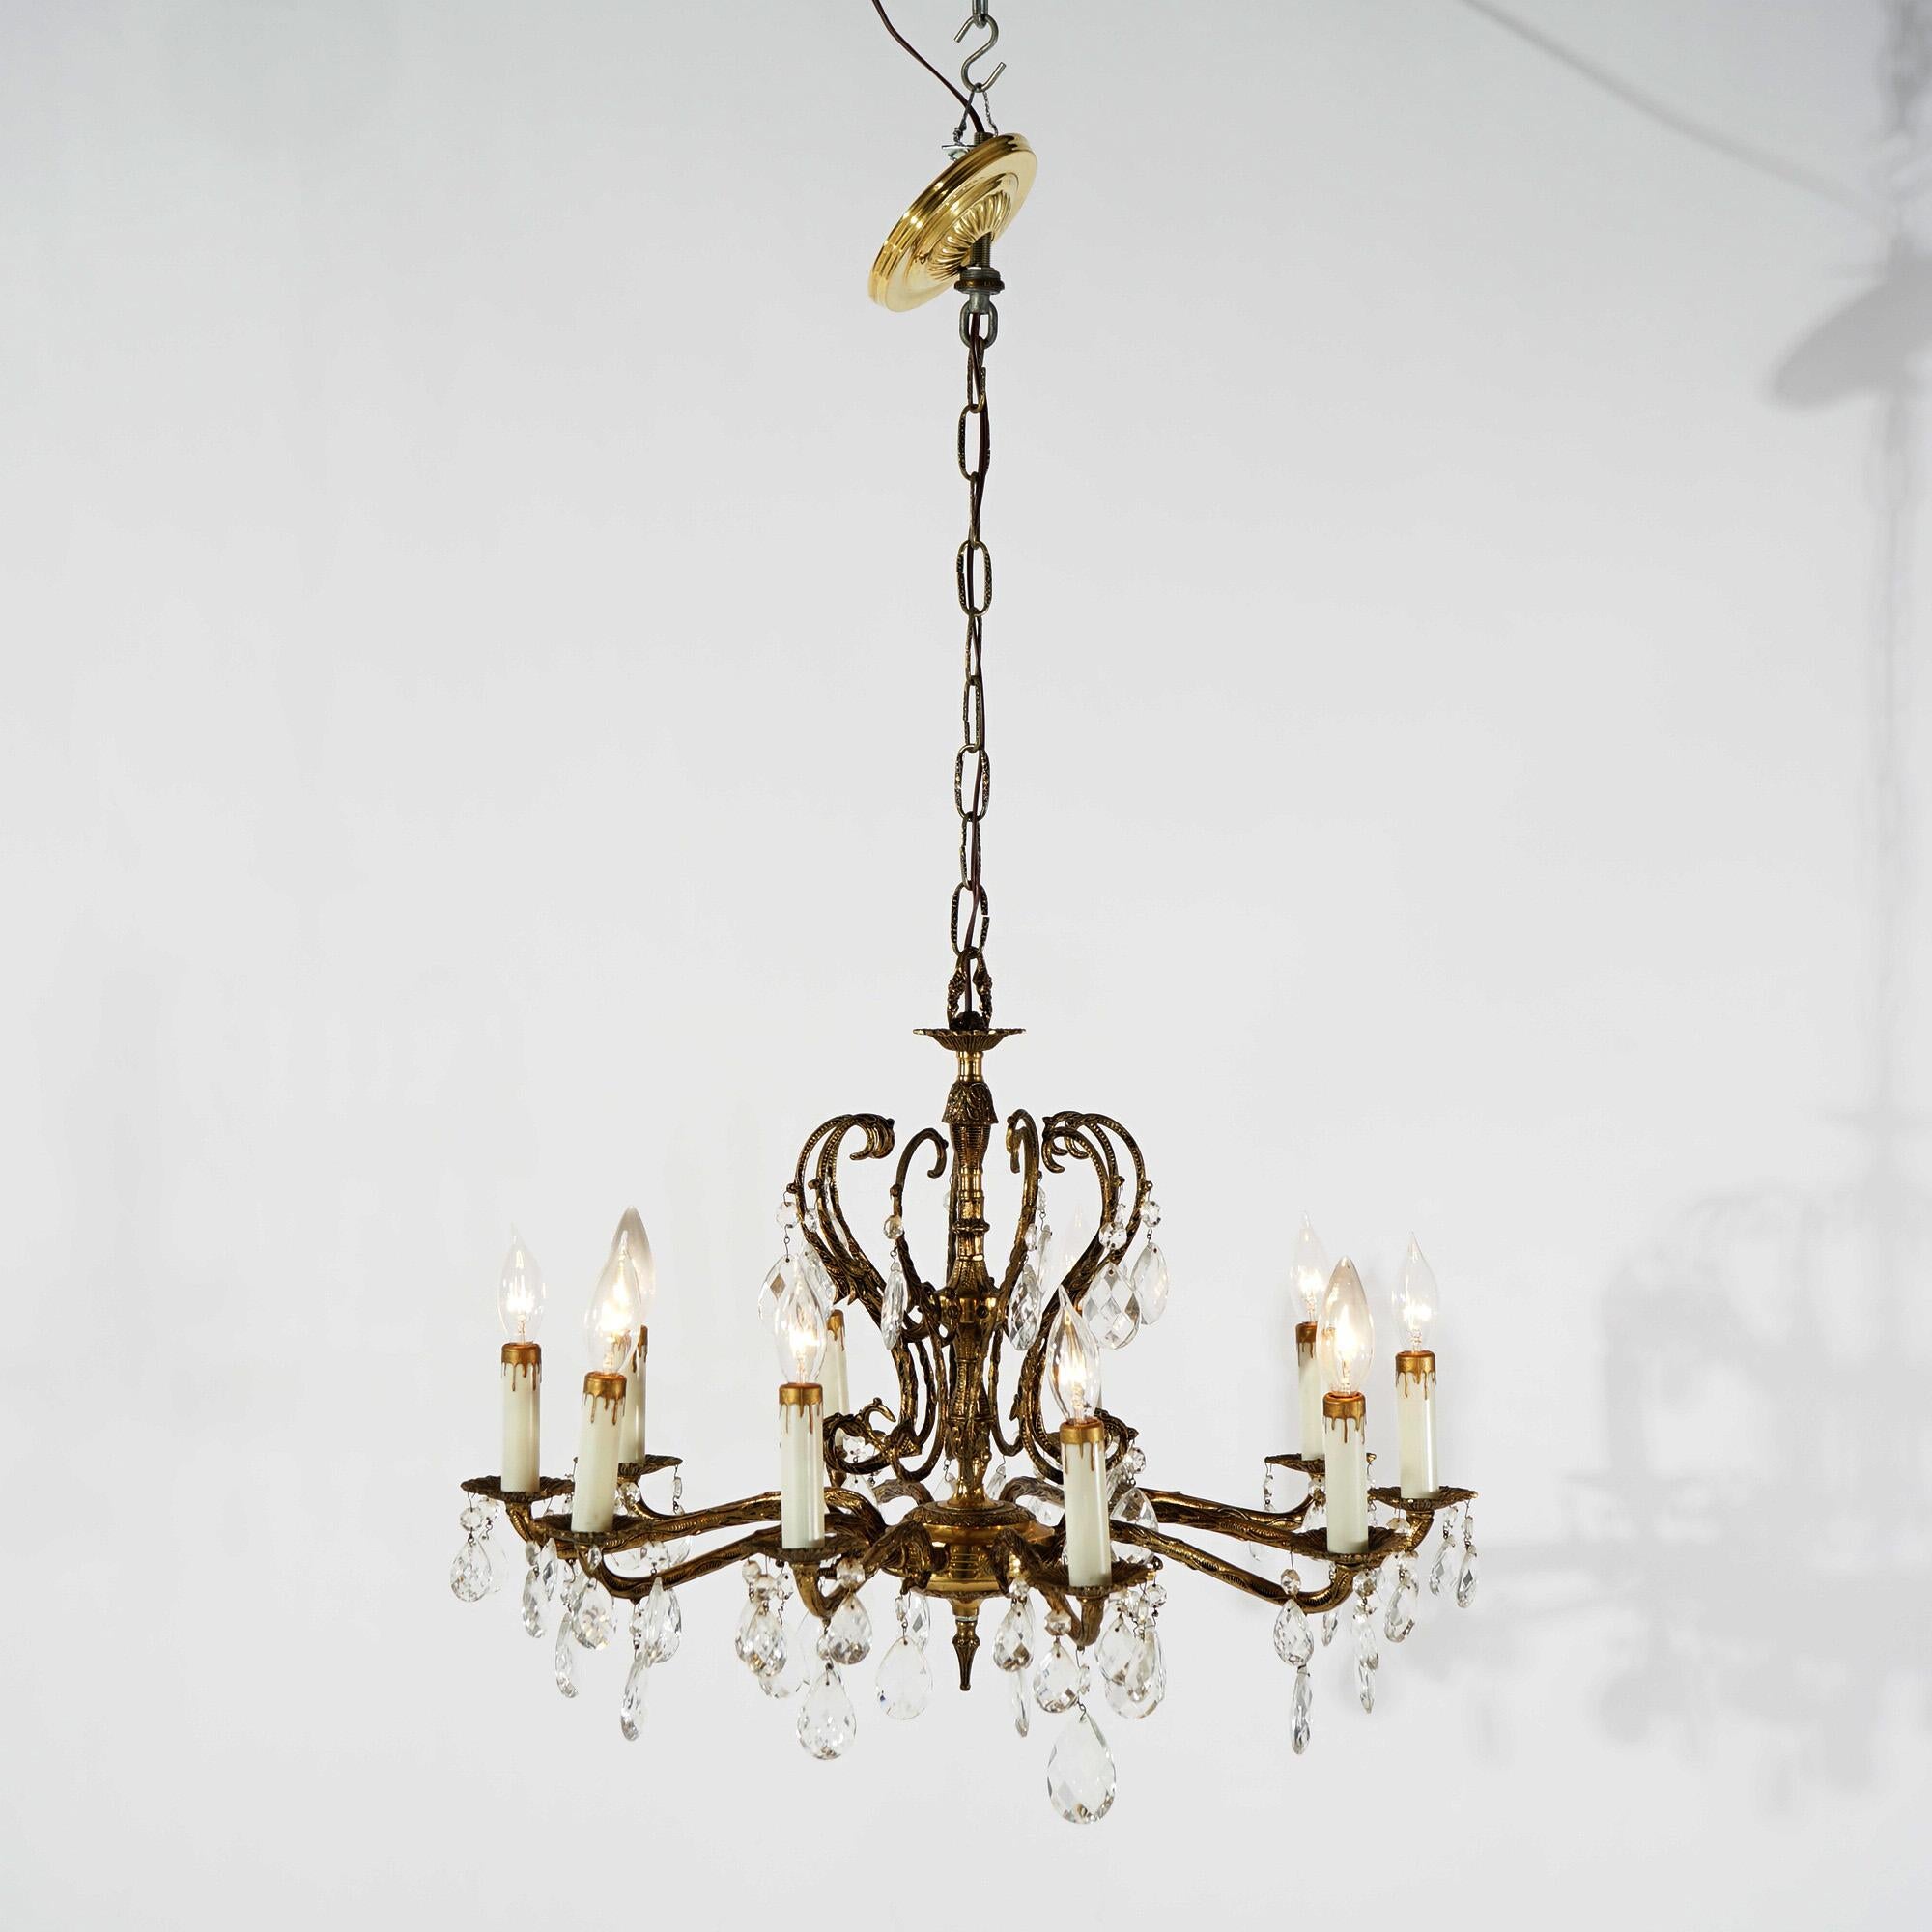 A French style chandelier offers bronzed metal frame with scroll form arms terminating in ten candle lights, hanging crystals throughout, circa 1940

Measures - 36